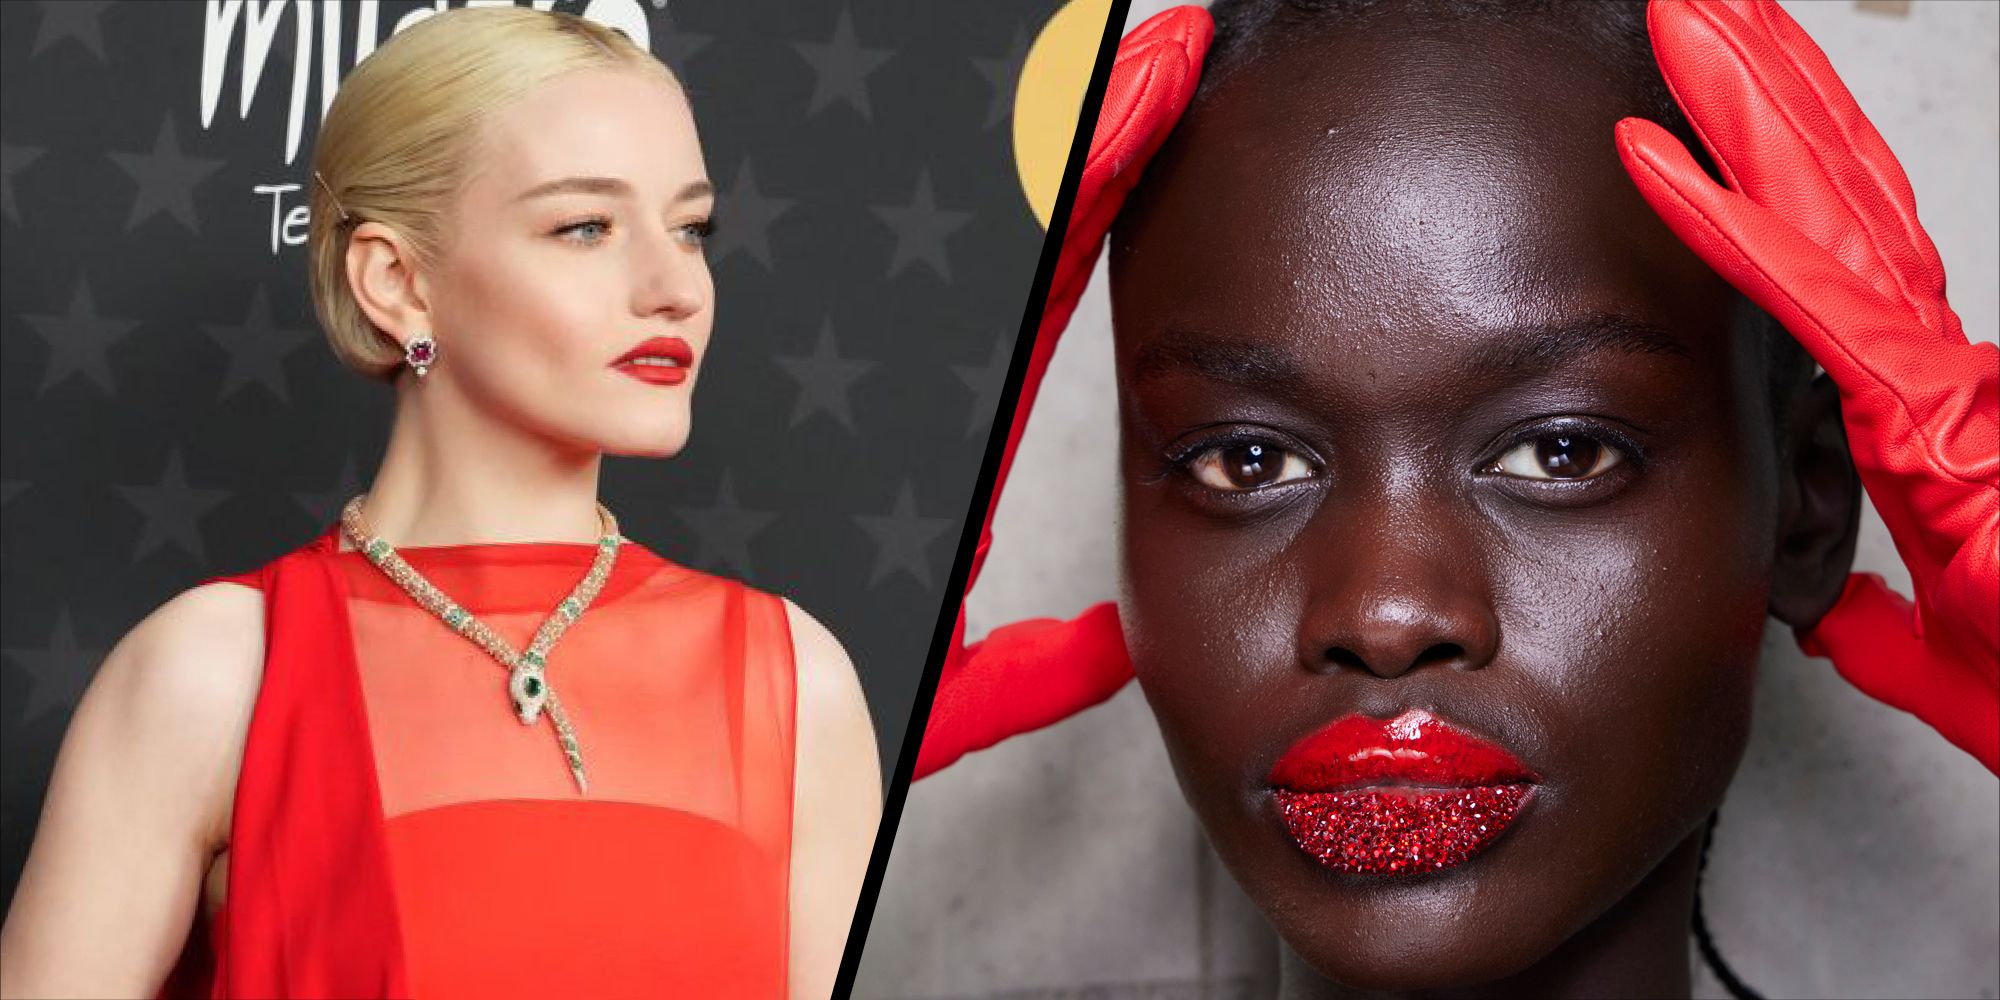 hjul Sada Forskudssalg As these celebrities show, in 2023 red lipstick has never looked better